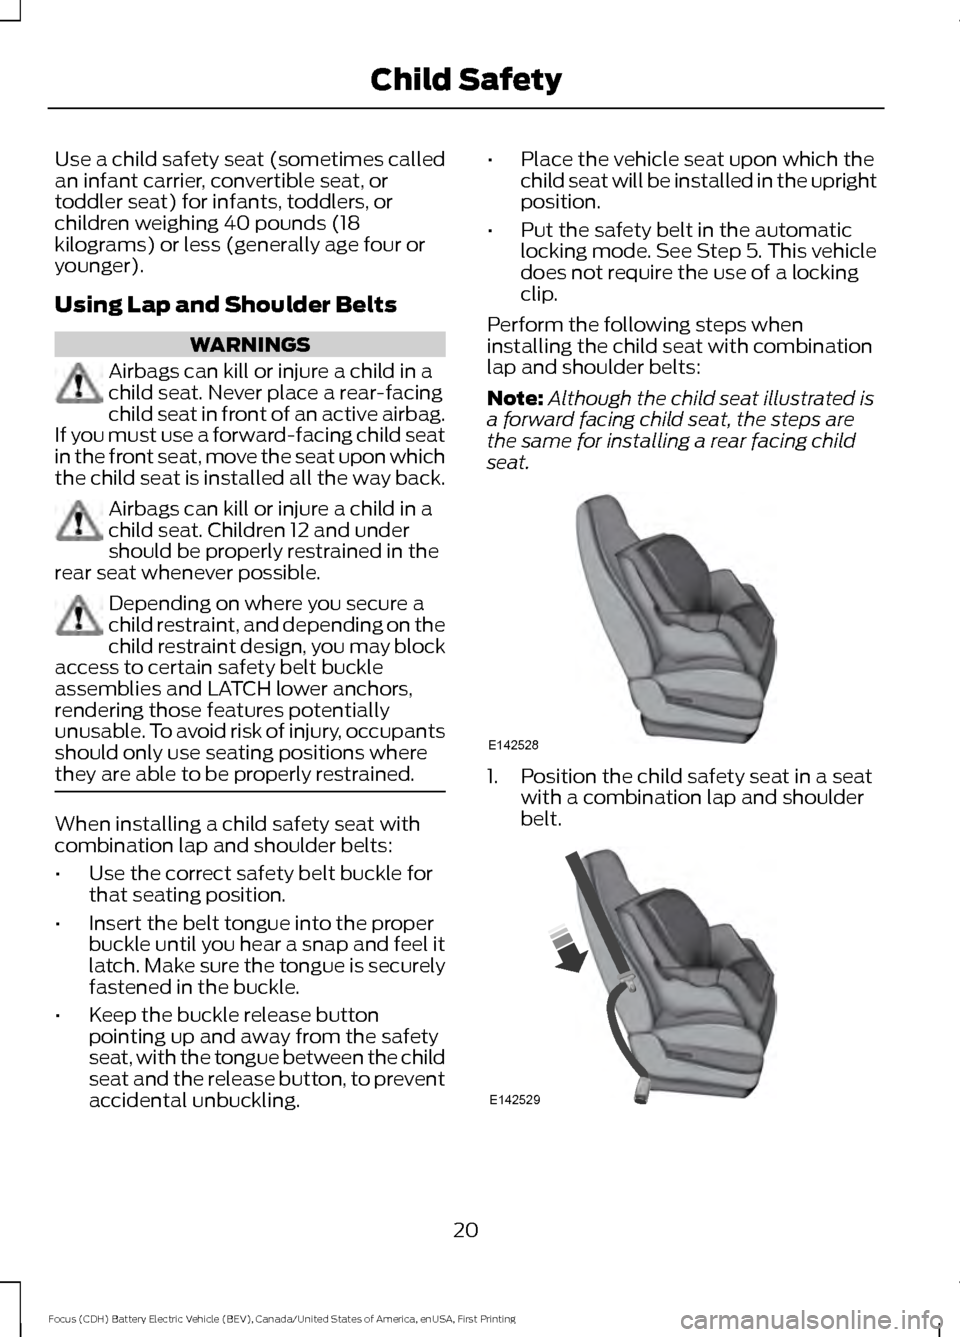 FORD FOCUS ELECTRIC 2016 3.G Owners Manual Use a child safety seat (sometimes called
an infant carrier, convertible seat, or
toddler seat) for infants, toddlers, or
children weighing 40 pounds (18
kilograms) or less (generally age four or
youn